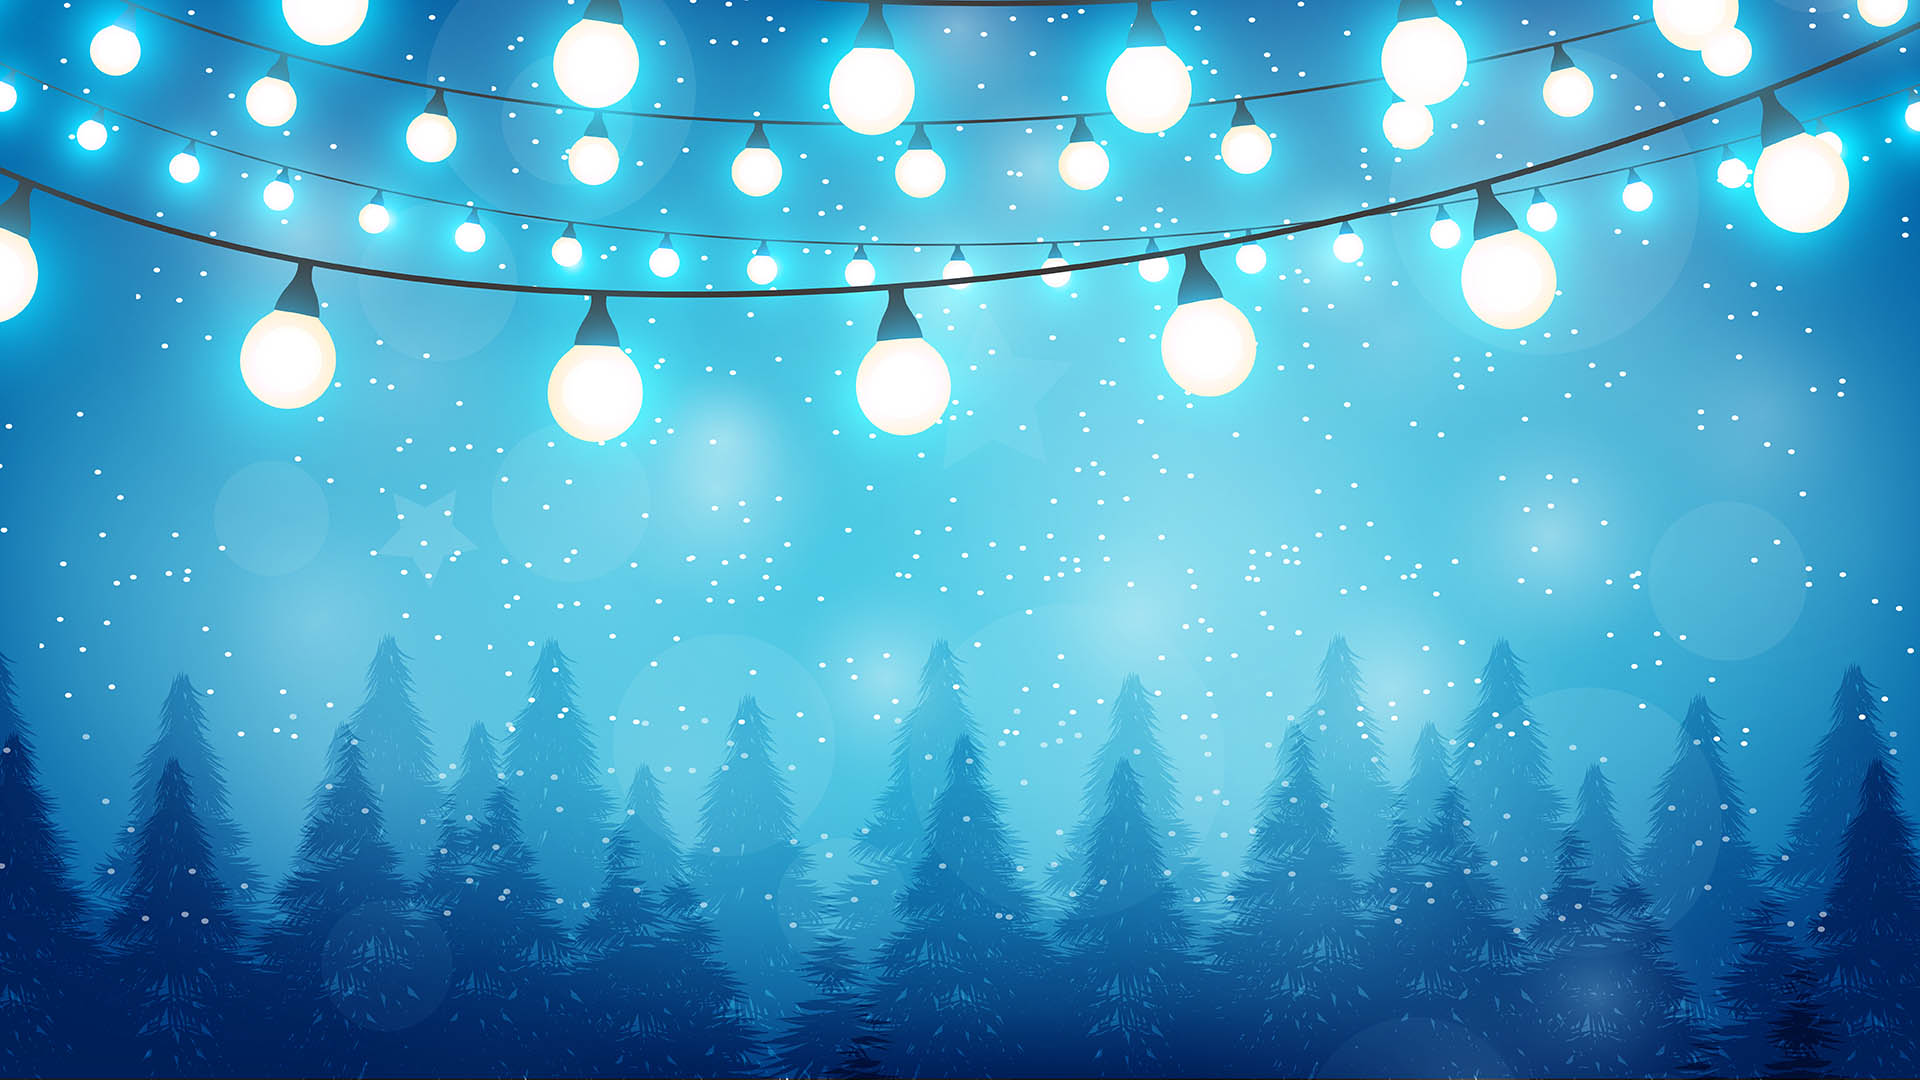 Holidays lights and trees background image